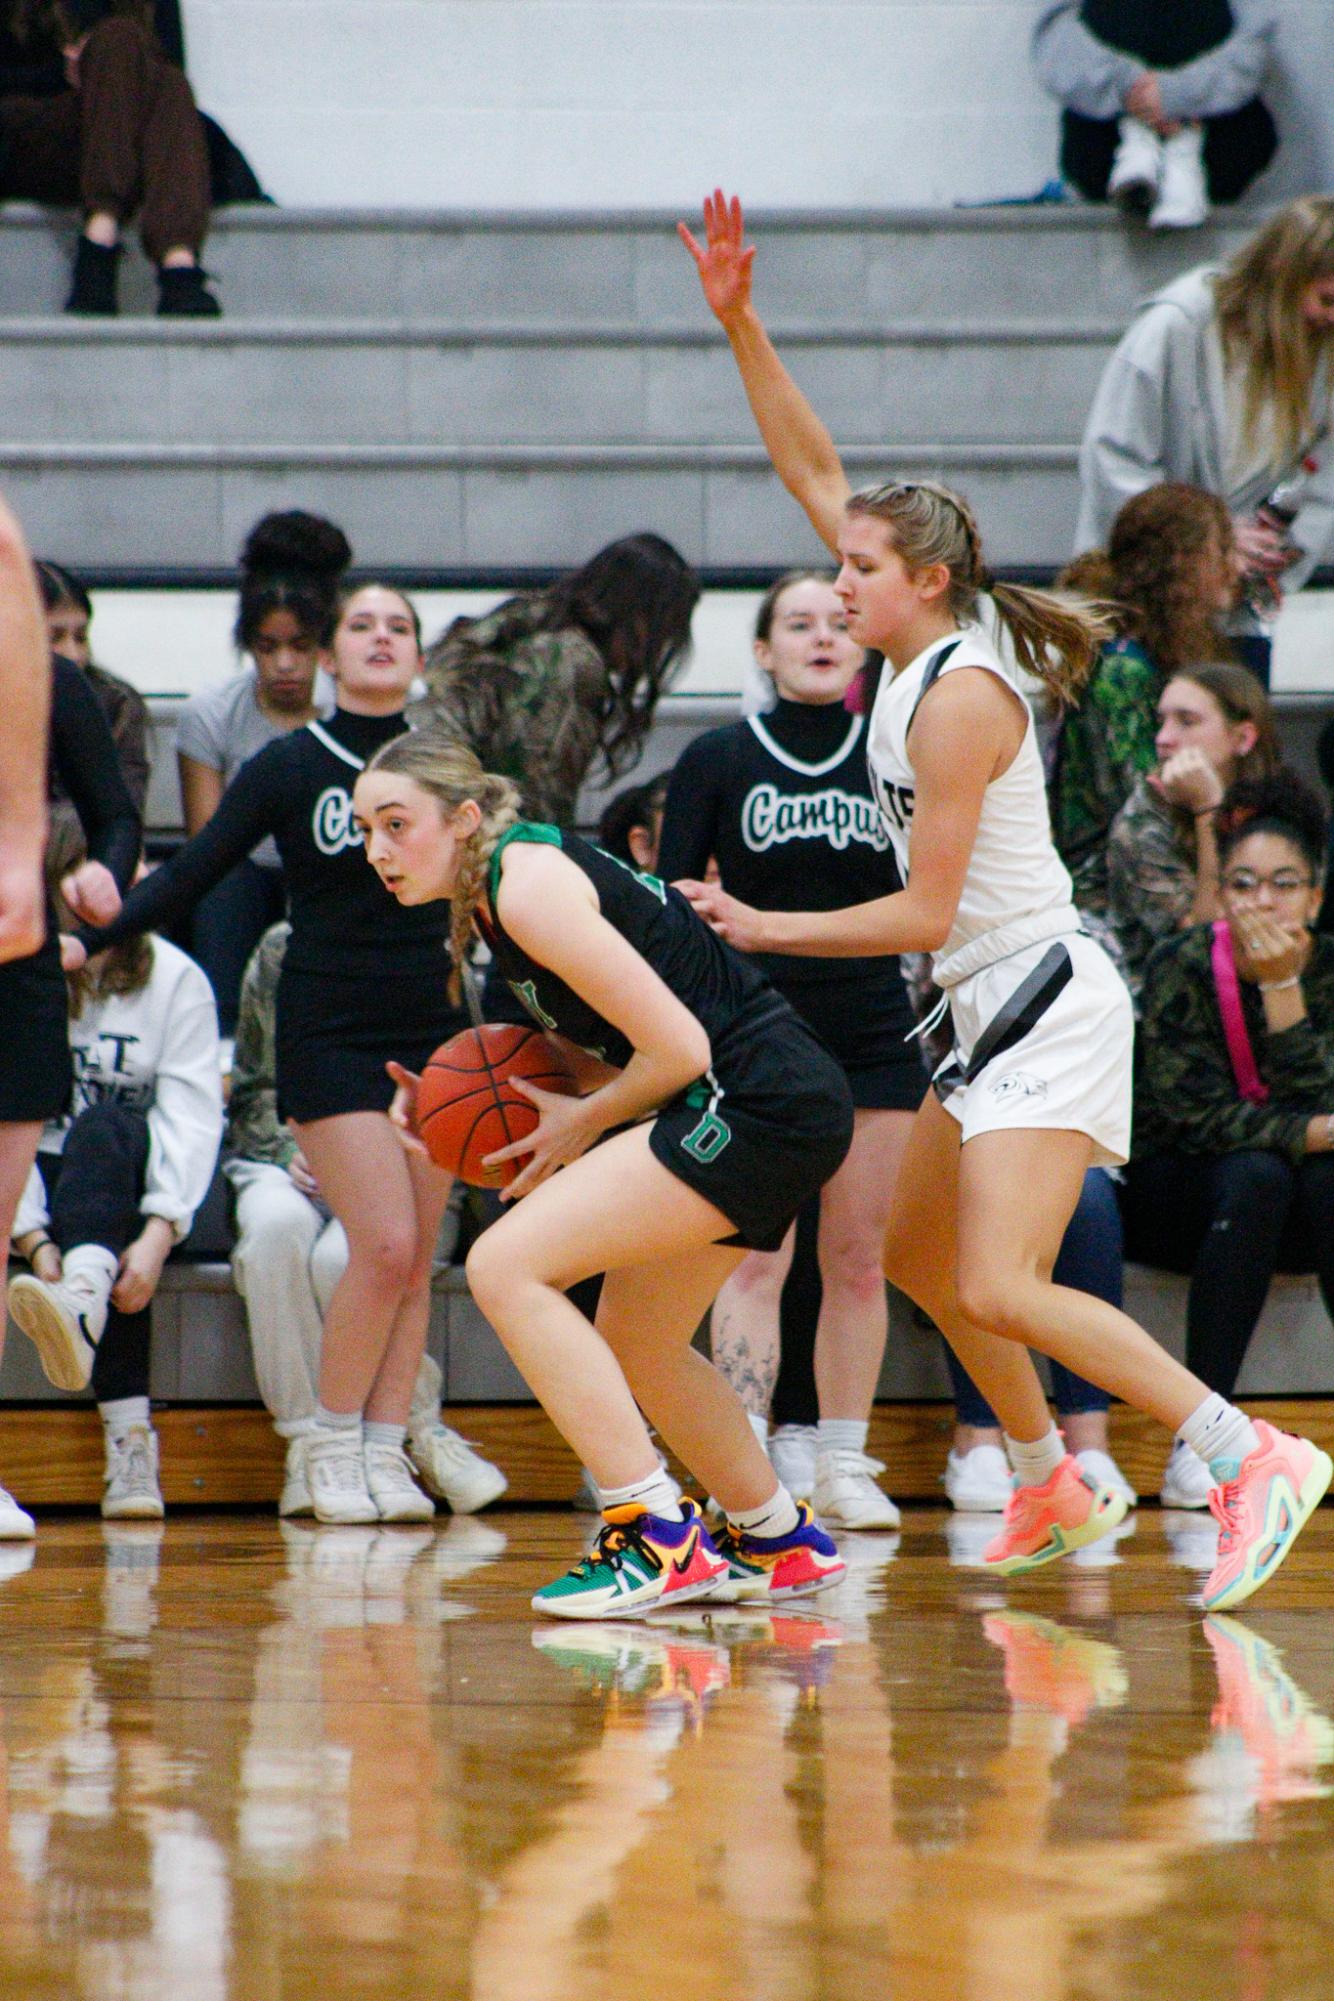 Girls+basketball+vs.+Campus+%28Photos+by+Laurisa+Rooney%29